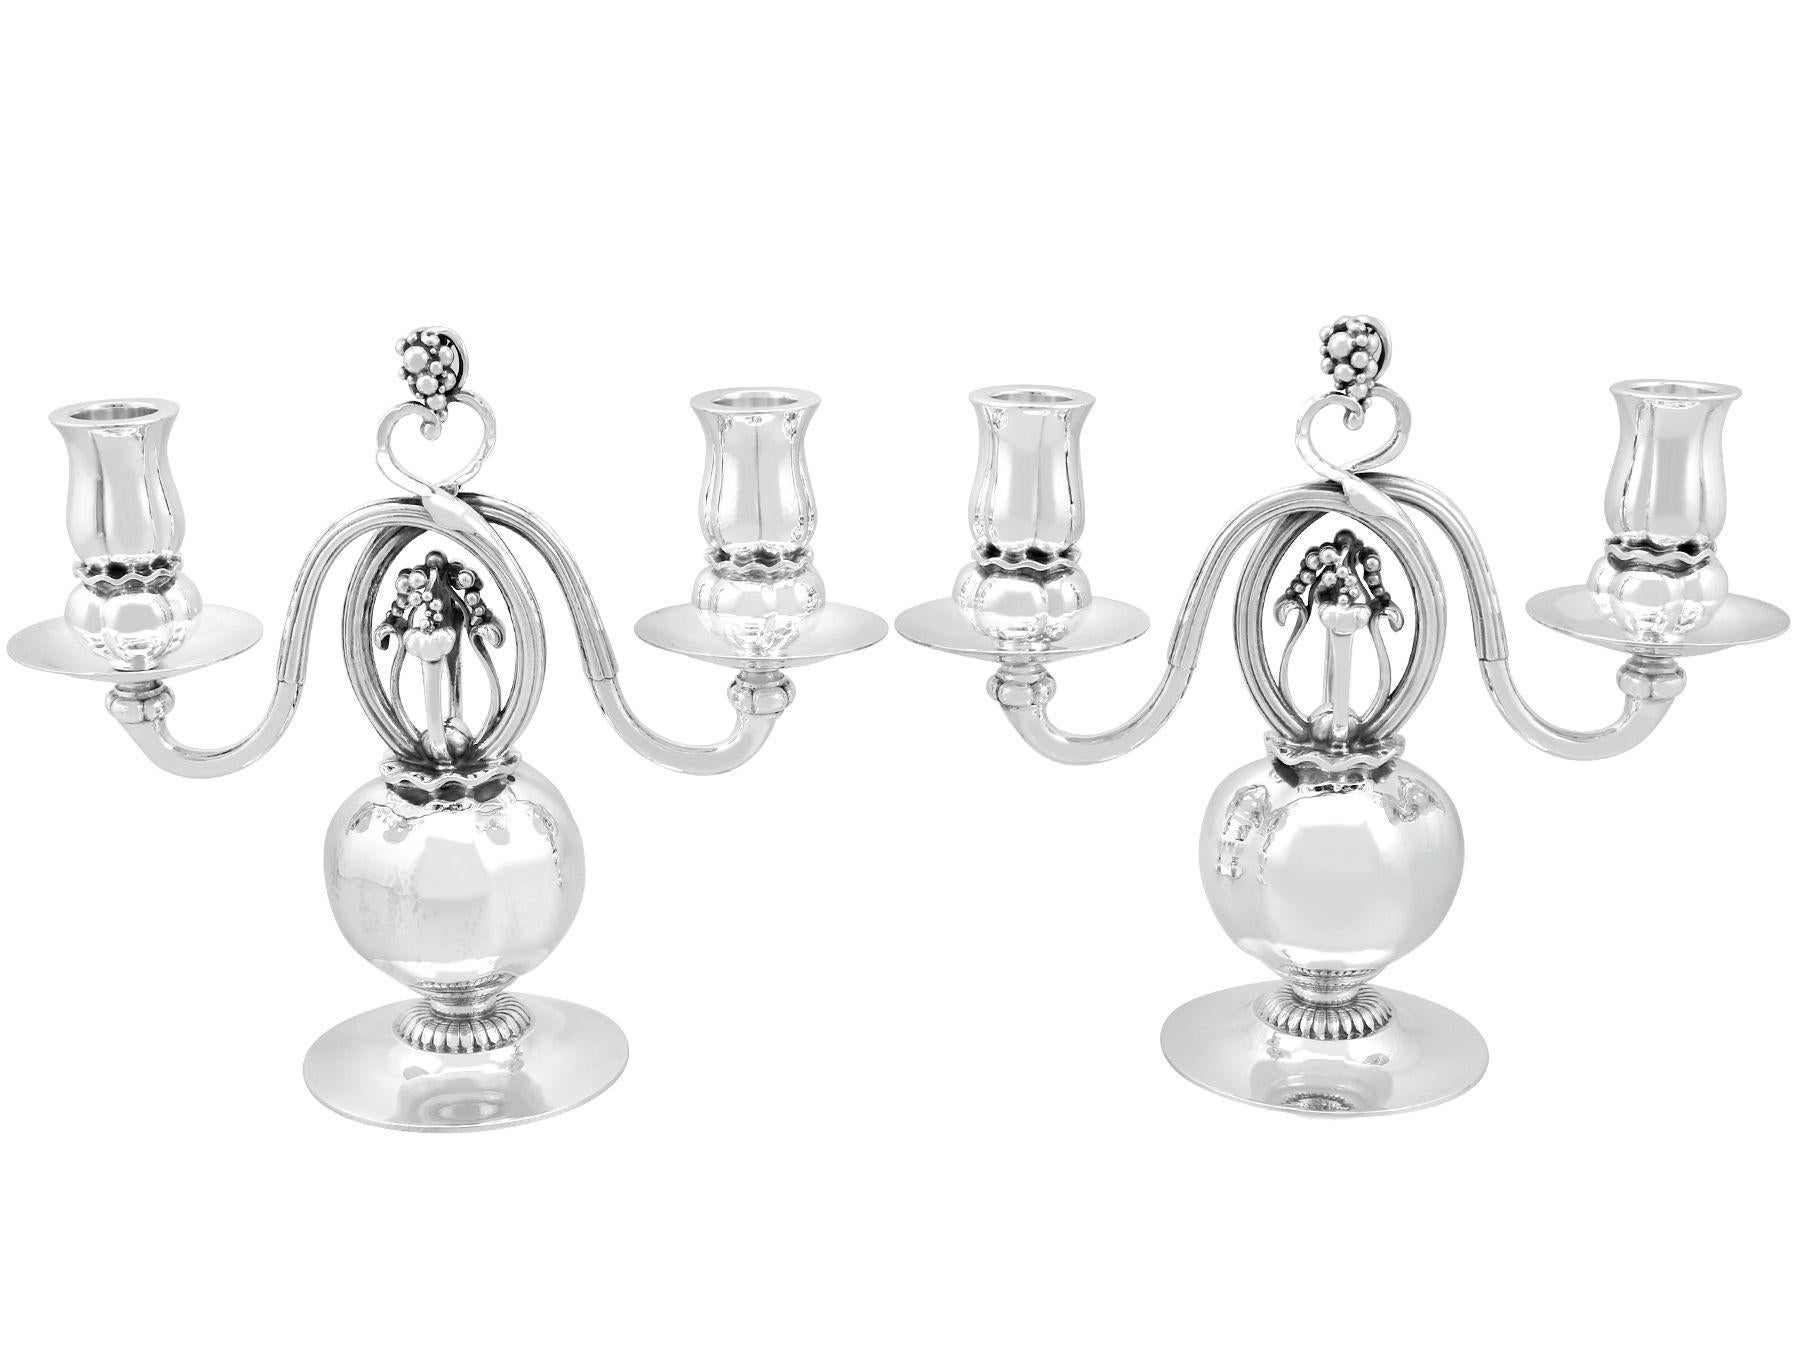 A magnificent, fine and impressive, rare pair of antique Danish sterling silver two light Pomegranate pattern candelabra made by Georg Jensen; an addition to our ornamental silverware collection

These magnificent and rare antique Danish cast